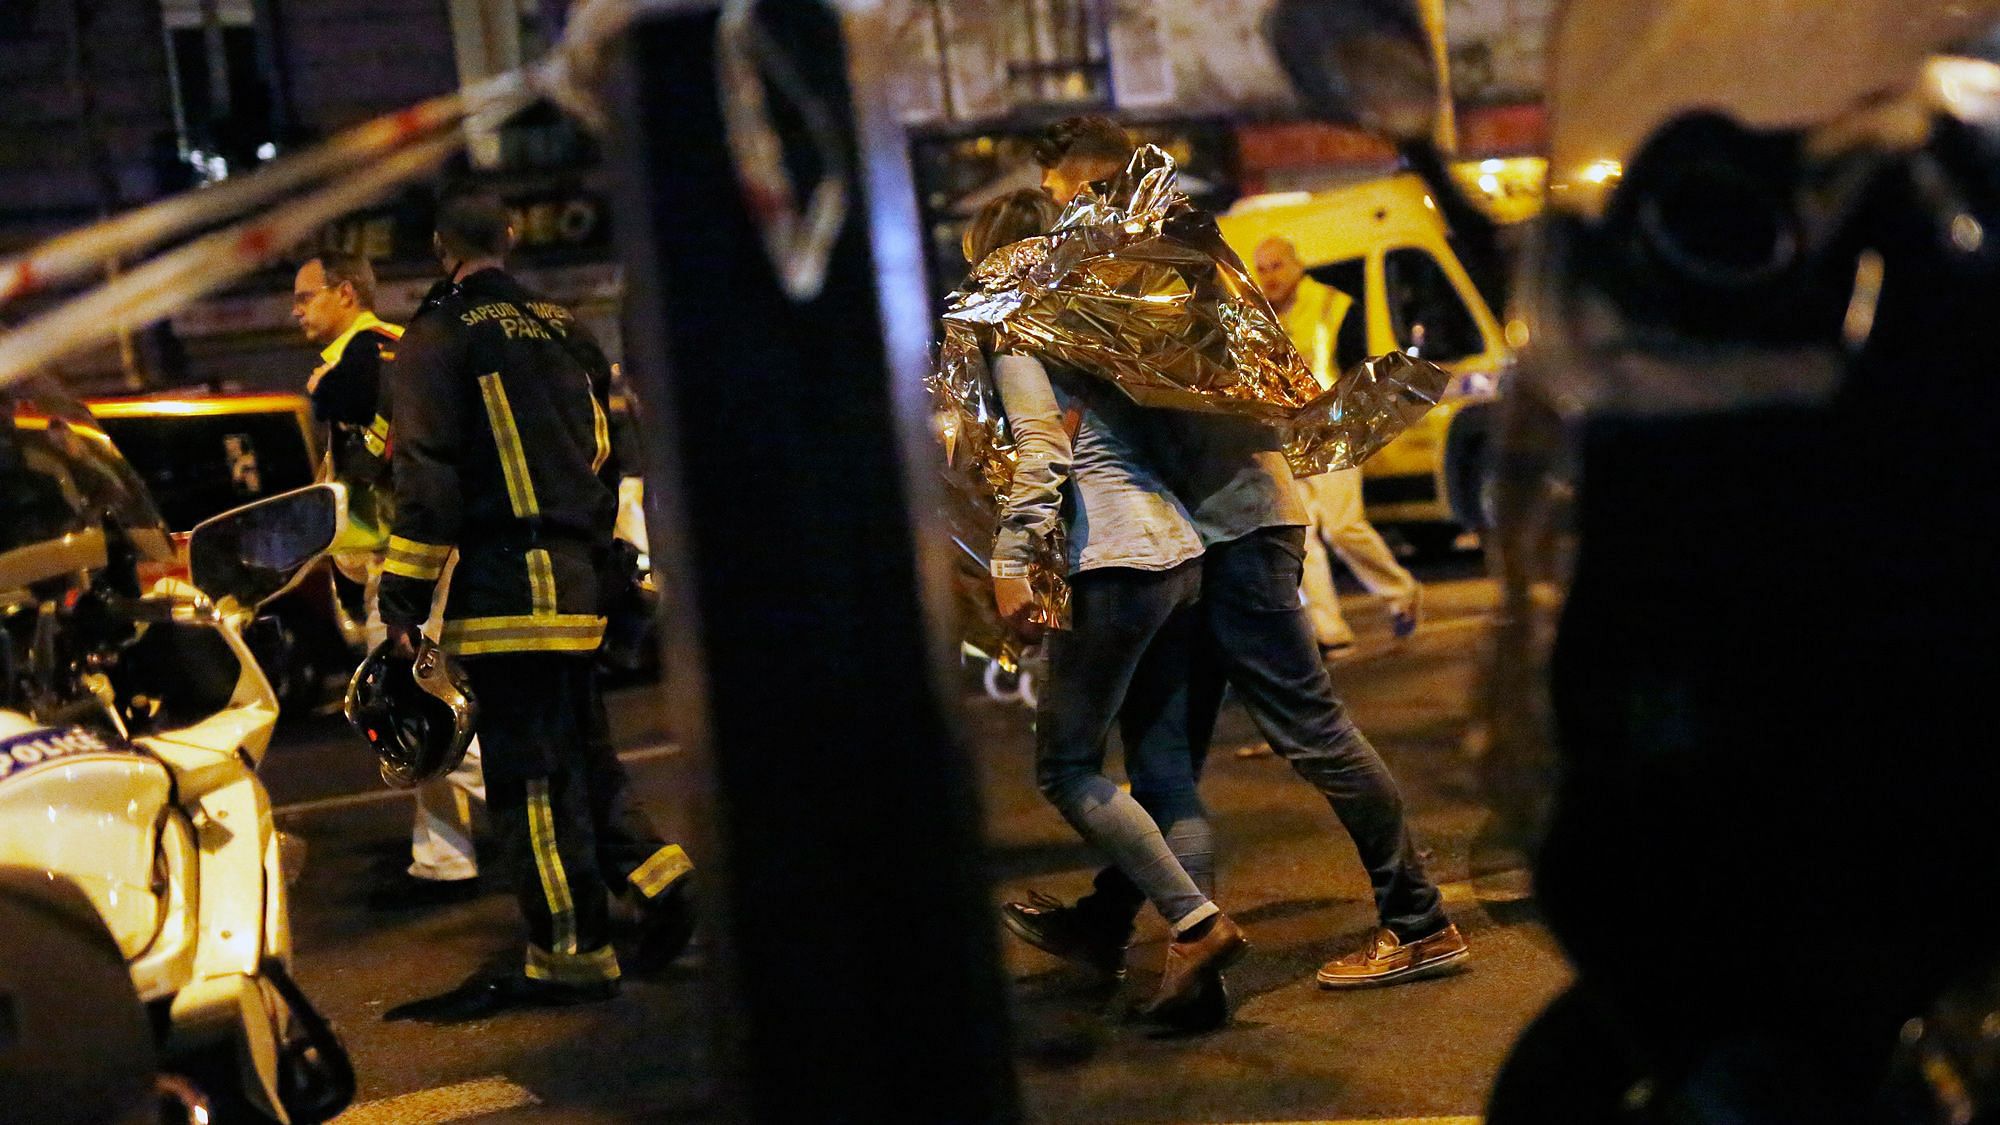 The terror attacks in Paris in November 2015 claimed over 130 lives.